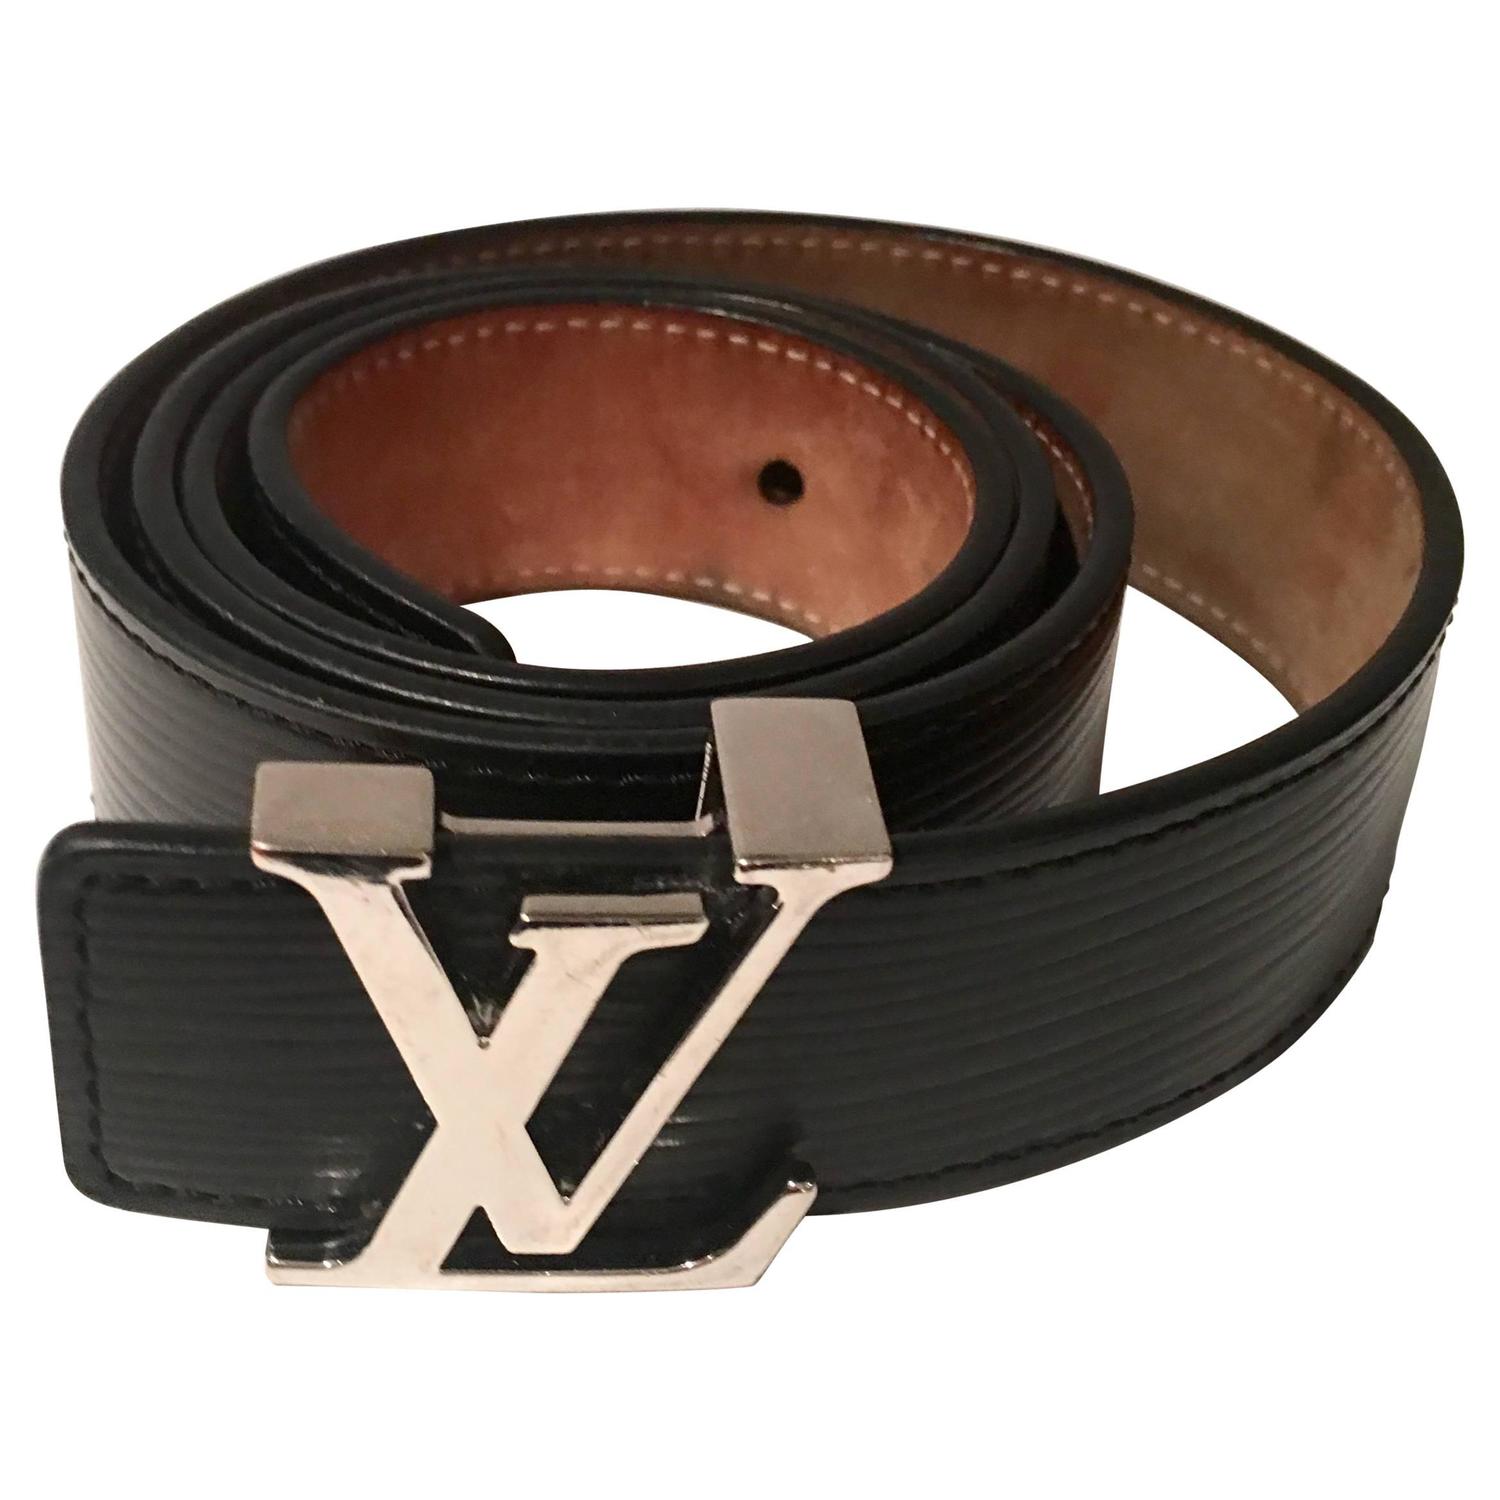 15 Louis Vuitton Belt Design Images For Men And Women In India | Styles At Life